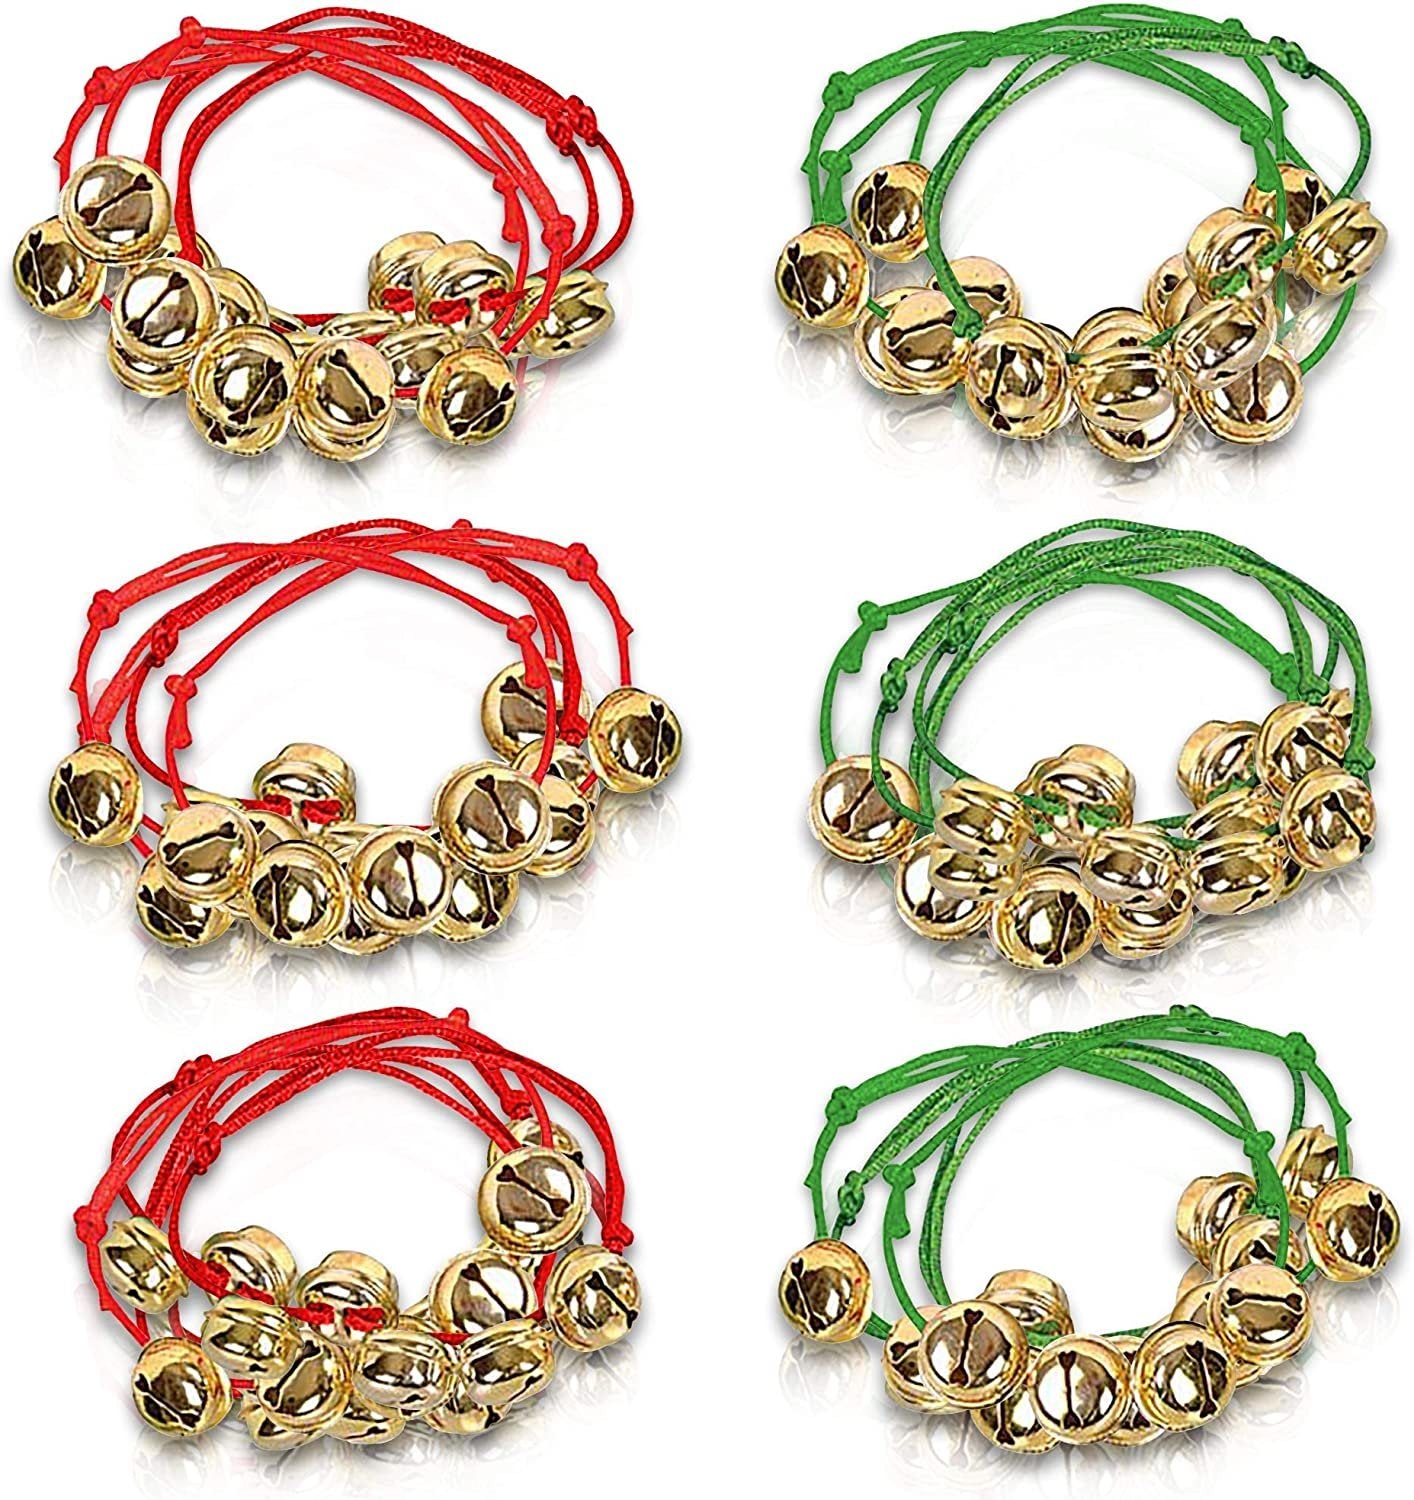 ArtCreativity Jingle Bell Bracelets, Set of 24, Red and Green Adjustable Holiday Bell Bracelets, Christmas Stocking Stuffers for Kids and Adults, Fun Holiday Gifts and Goodie Bag Fillers